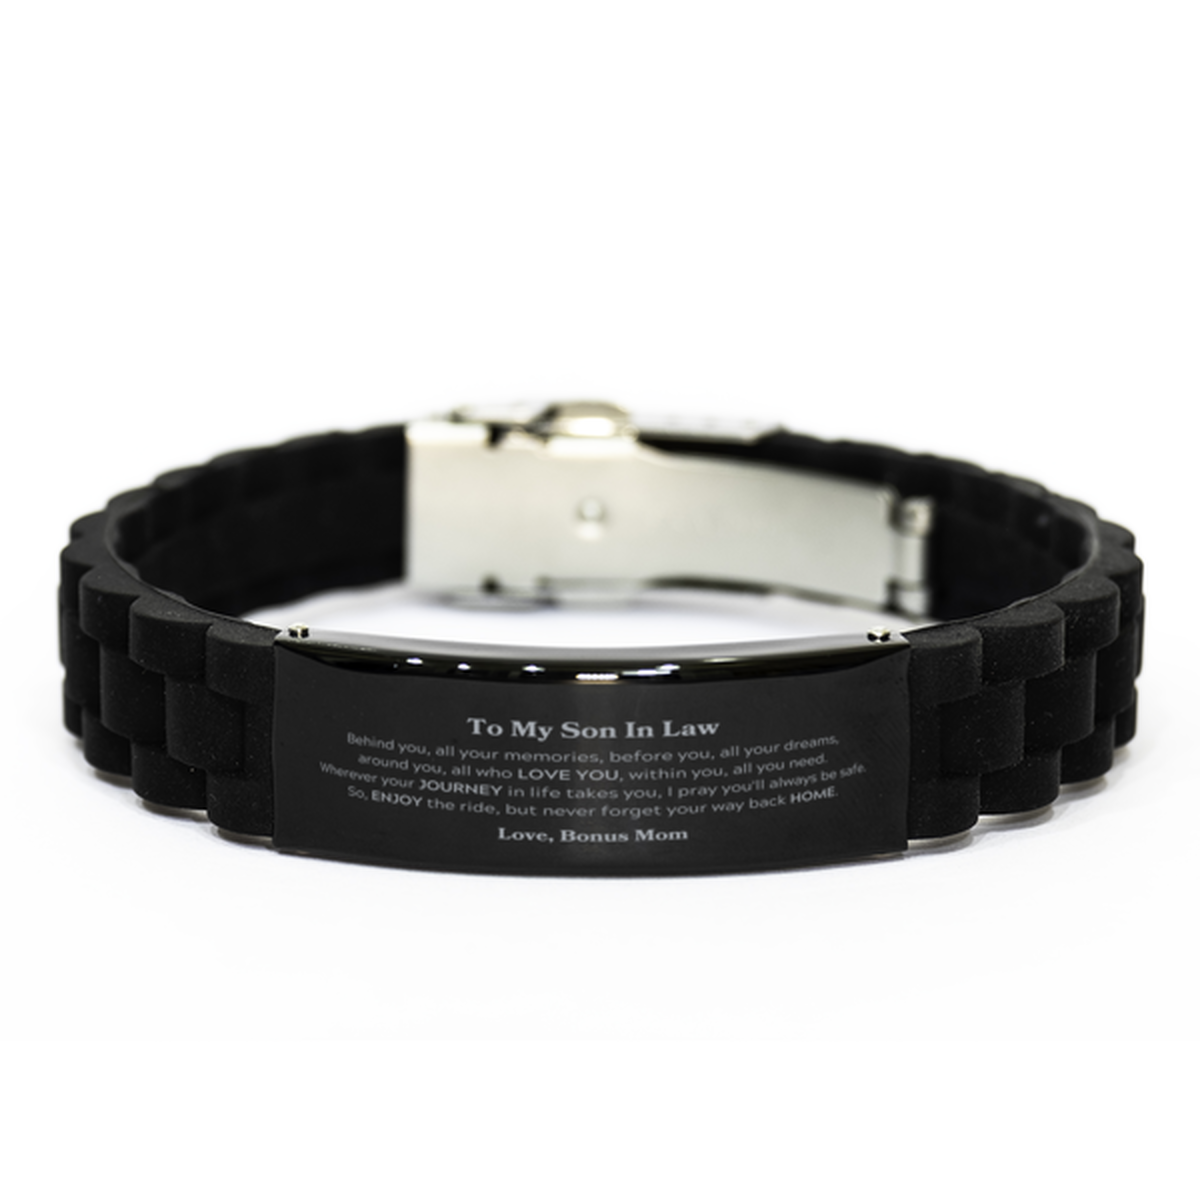 To My Son In Law Graduation Gifts from Bonus Mom, Son In Law Black Glidelock Clasp Bracelet Christmas Birthday Gifts for Son In Law Behind you, all your memories, before you, all your dreams. Love, Bonus Mom